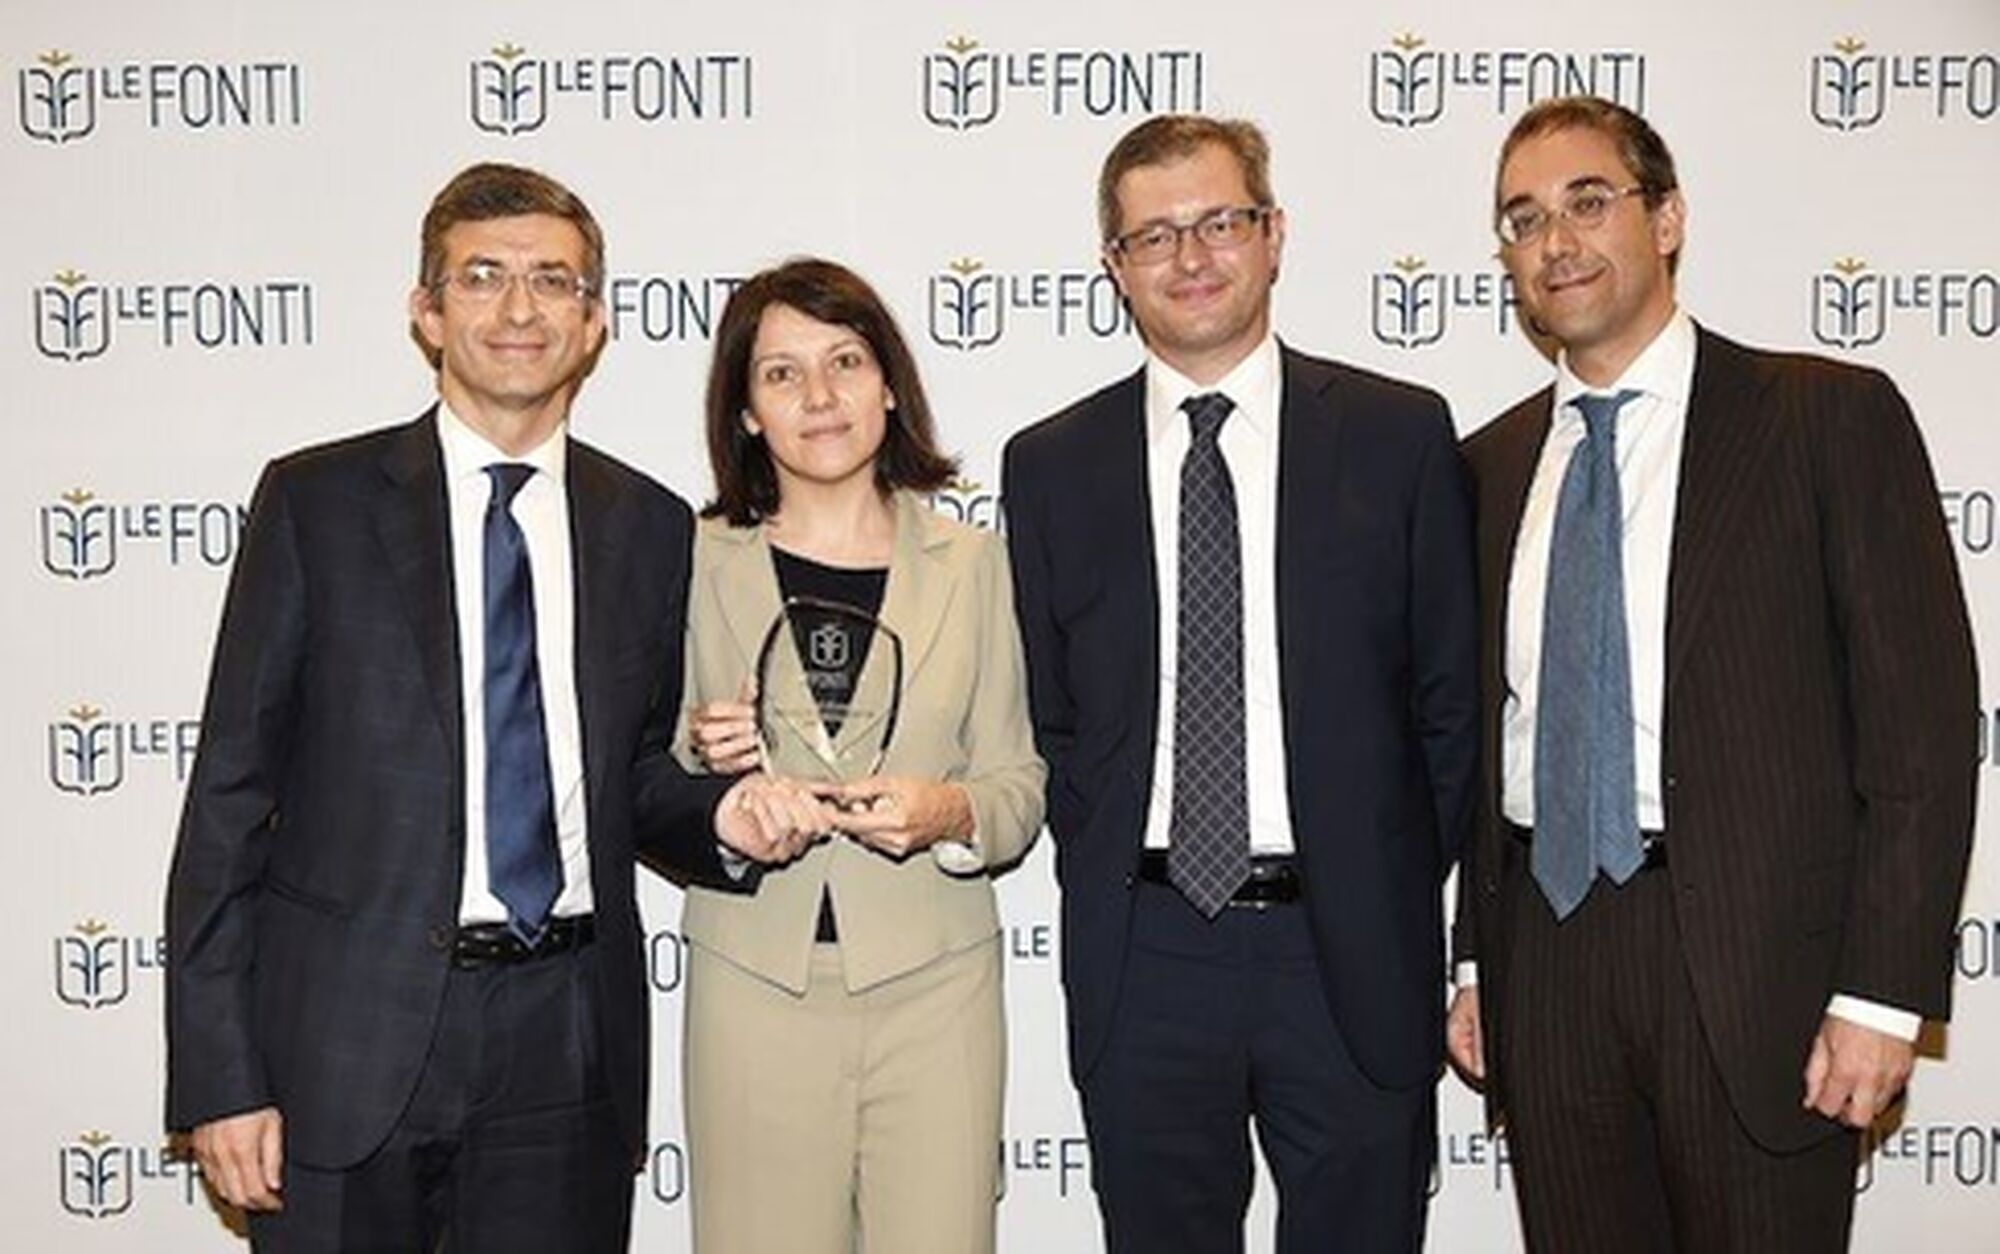 Le Fonti Awards 2016, Todarello & Partners Boutique of Excellence of the year in Energy